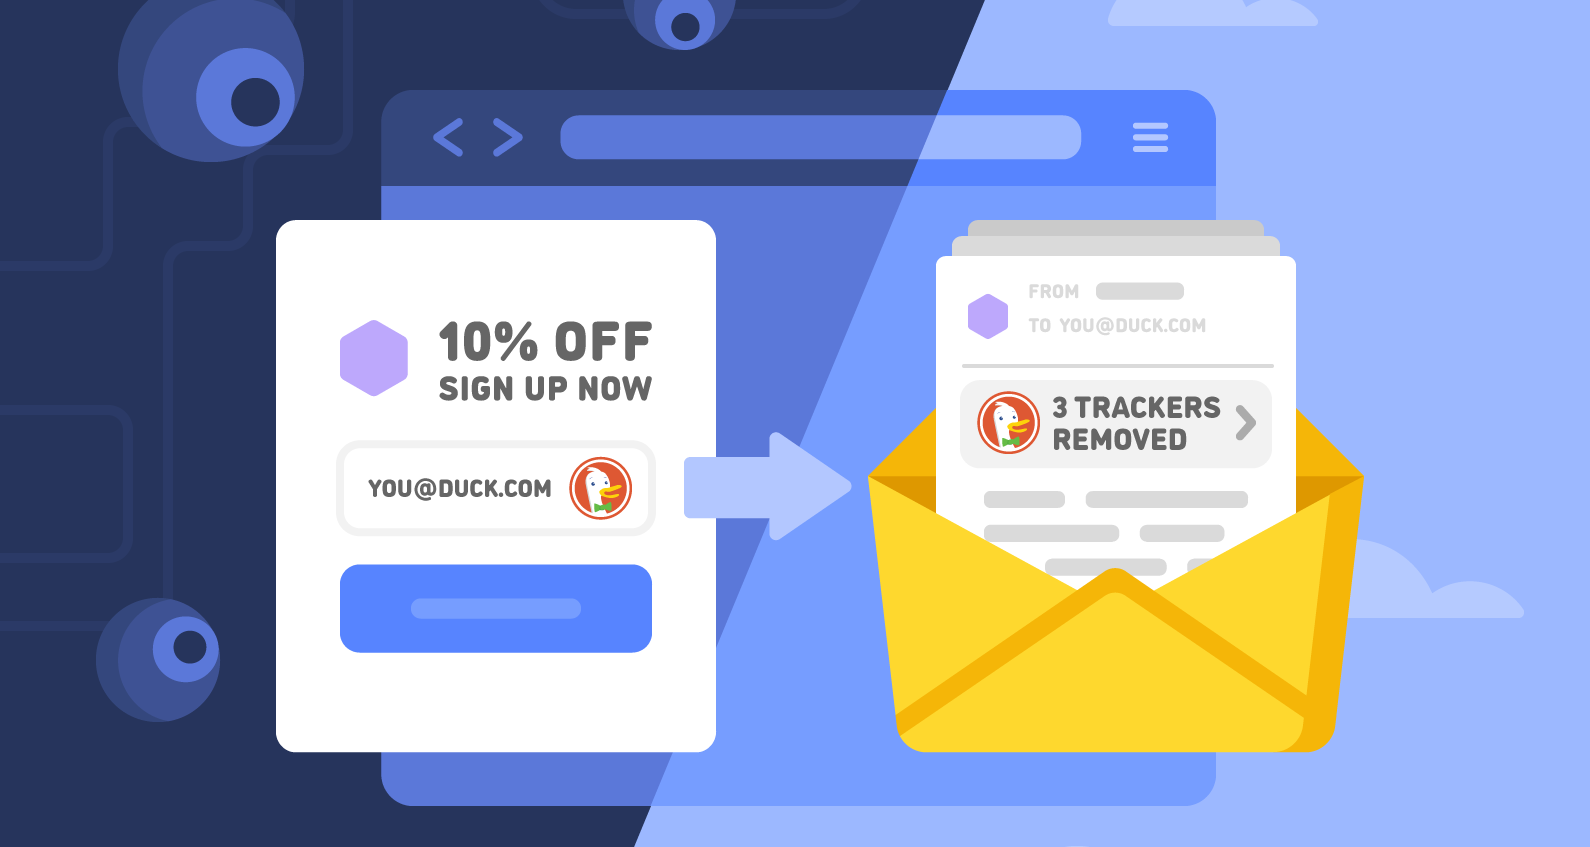 DuckDuckGo tackles email privacy with fresh tracker-stripping carrier